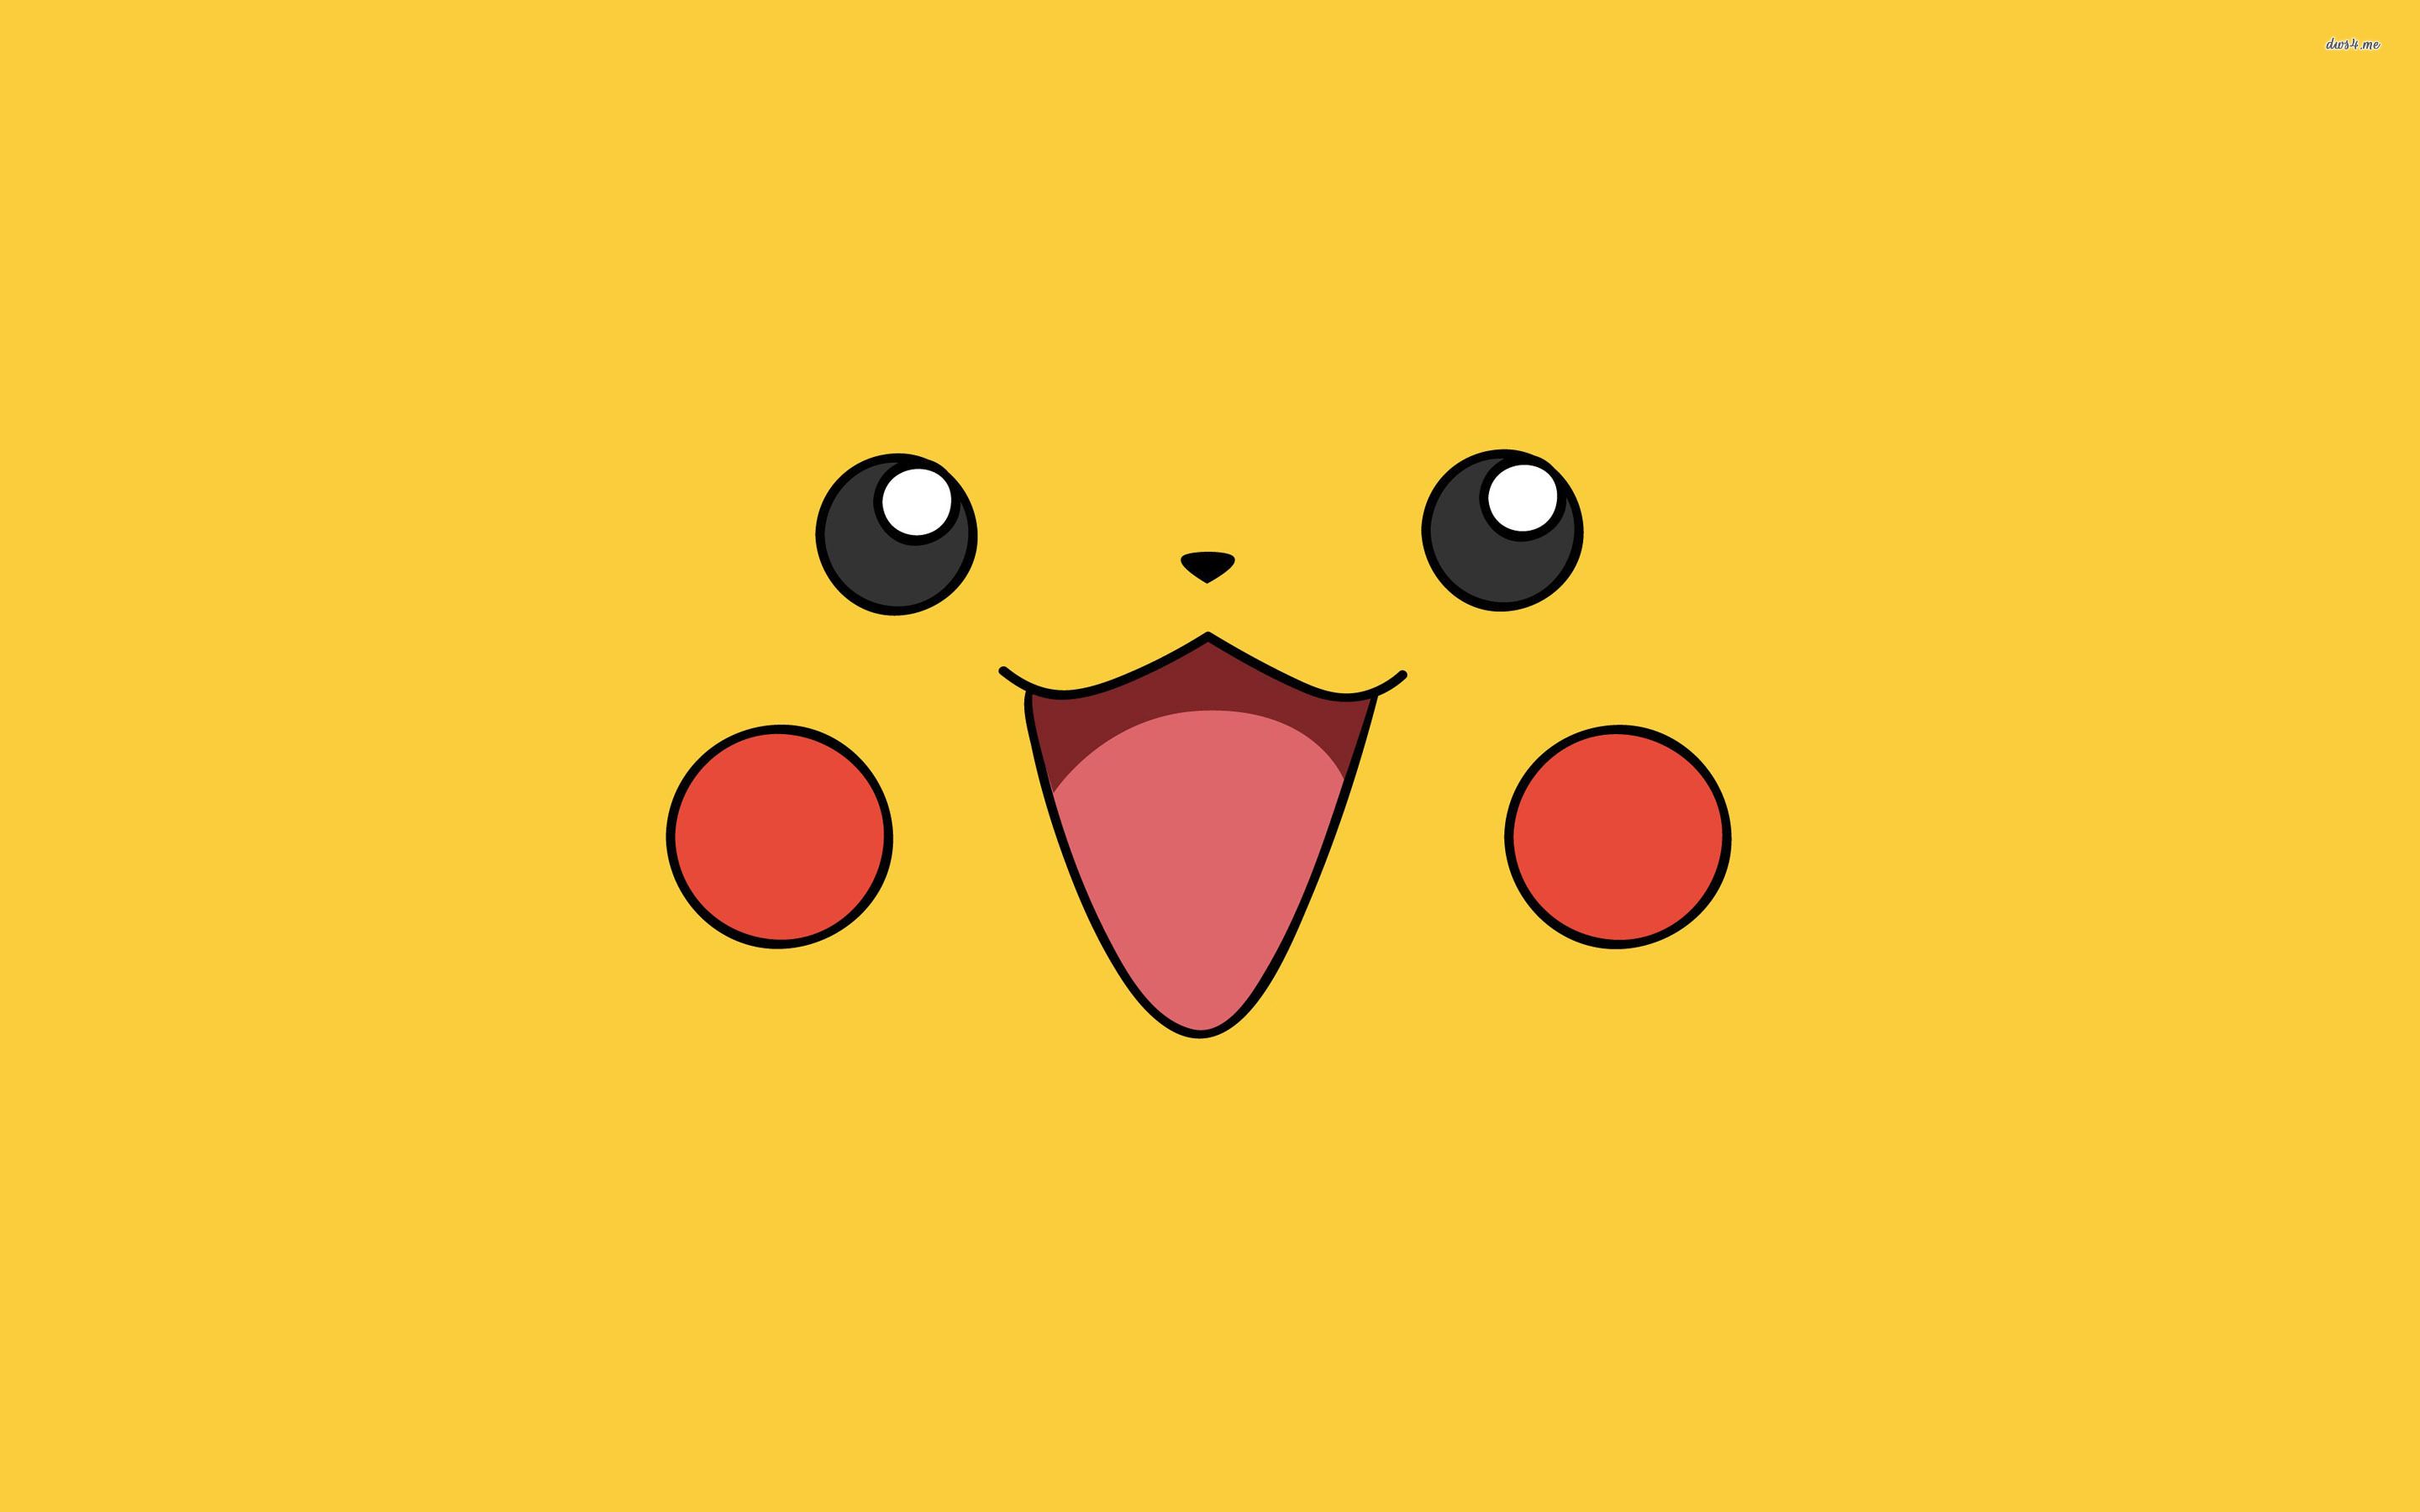 Pikachu games online to play